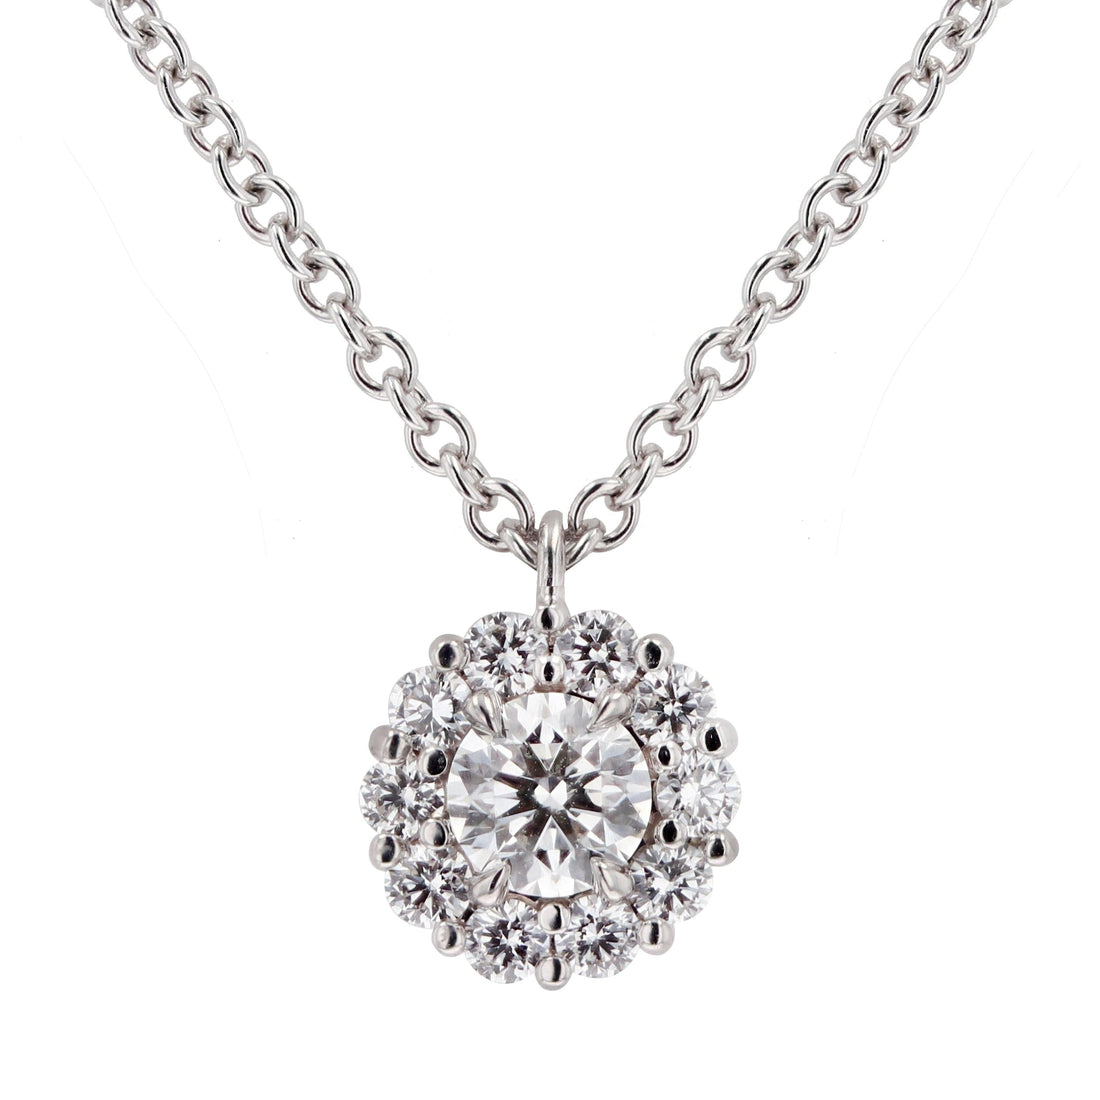 Skeie's Legacy Collection Diamond Cluster Pendant Necklace in White Gold - Skeie's Jewelers